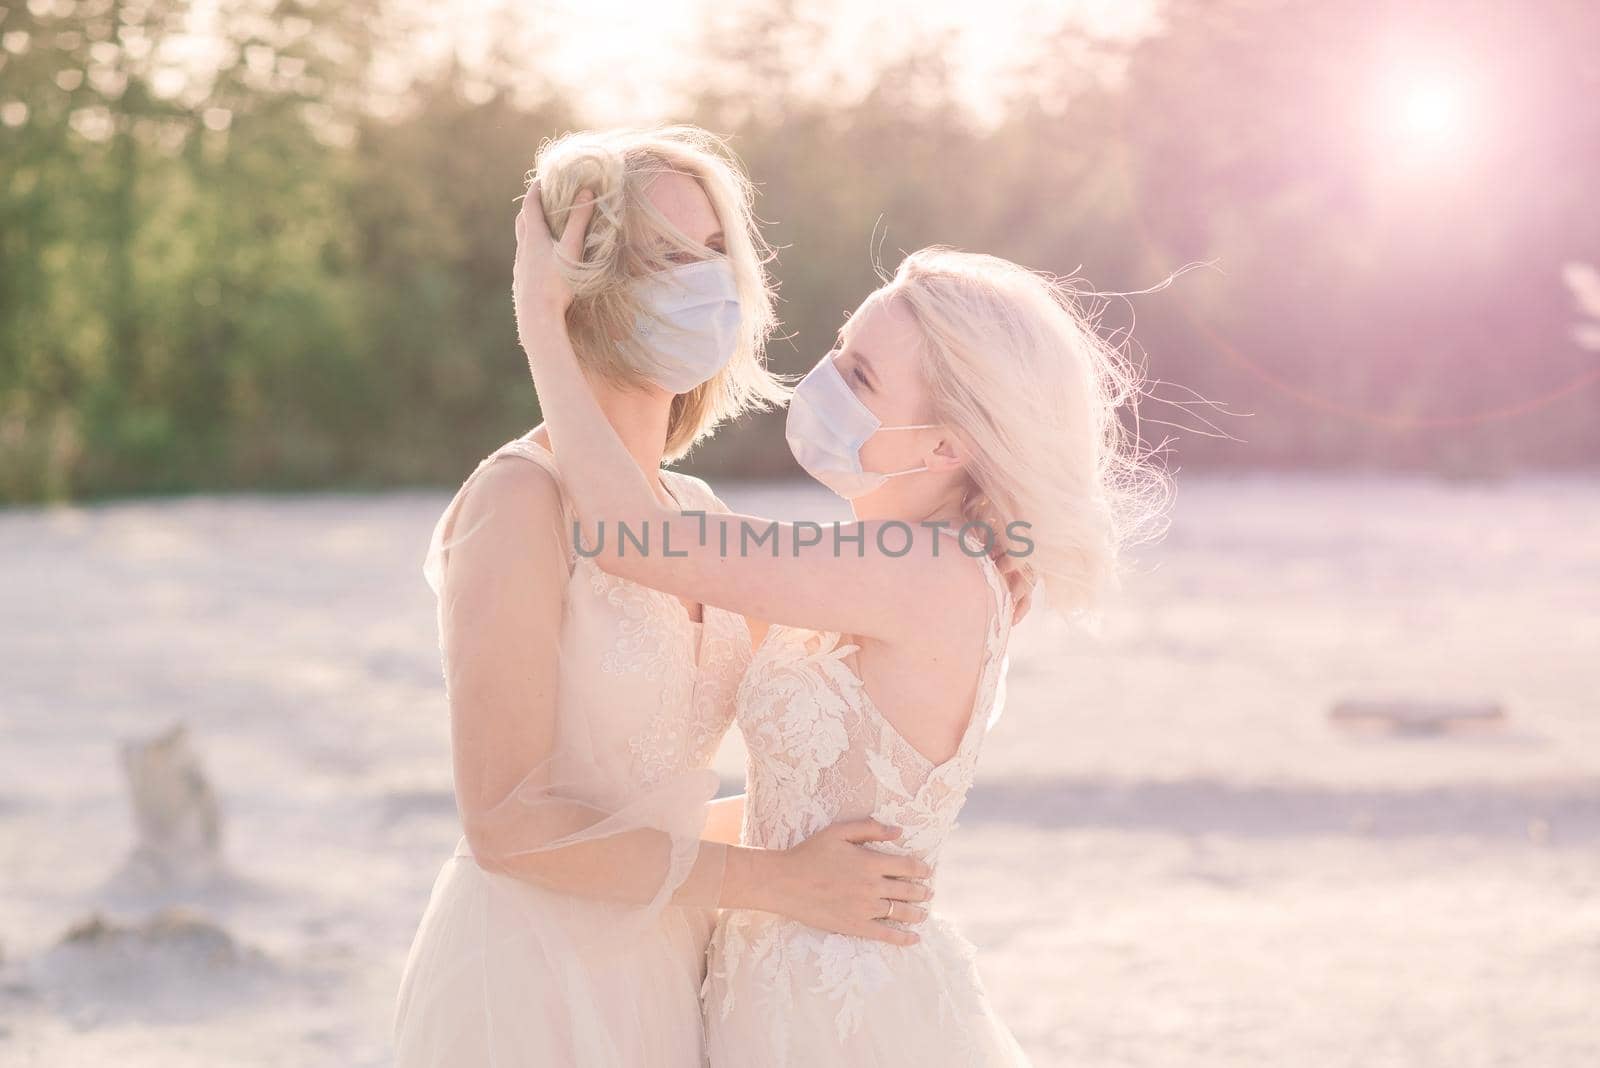 Lesbian couple wedding, wear masks to prevent epidemic COVID-19, on sand background by Zelenin